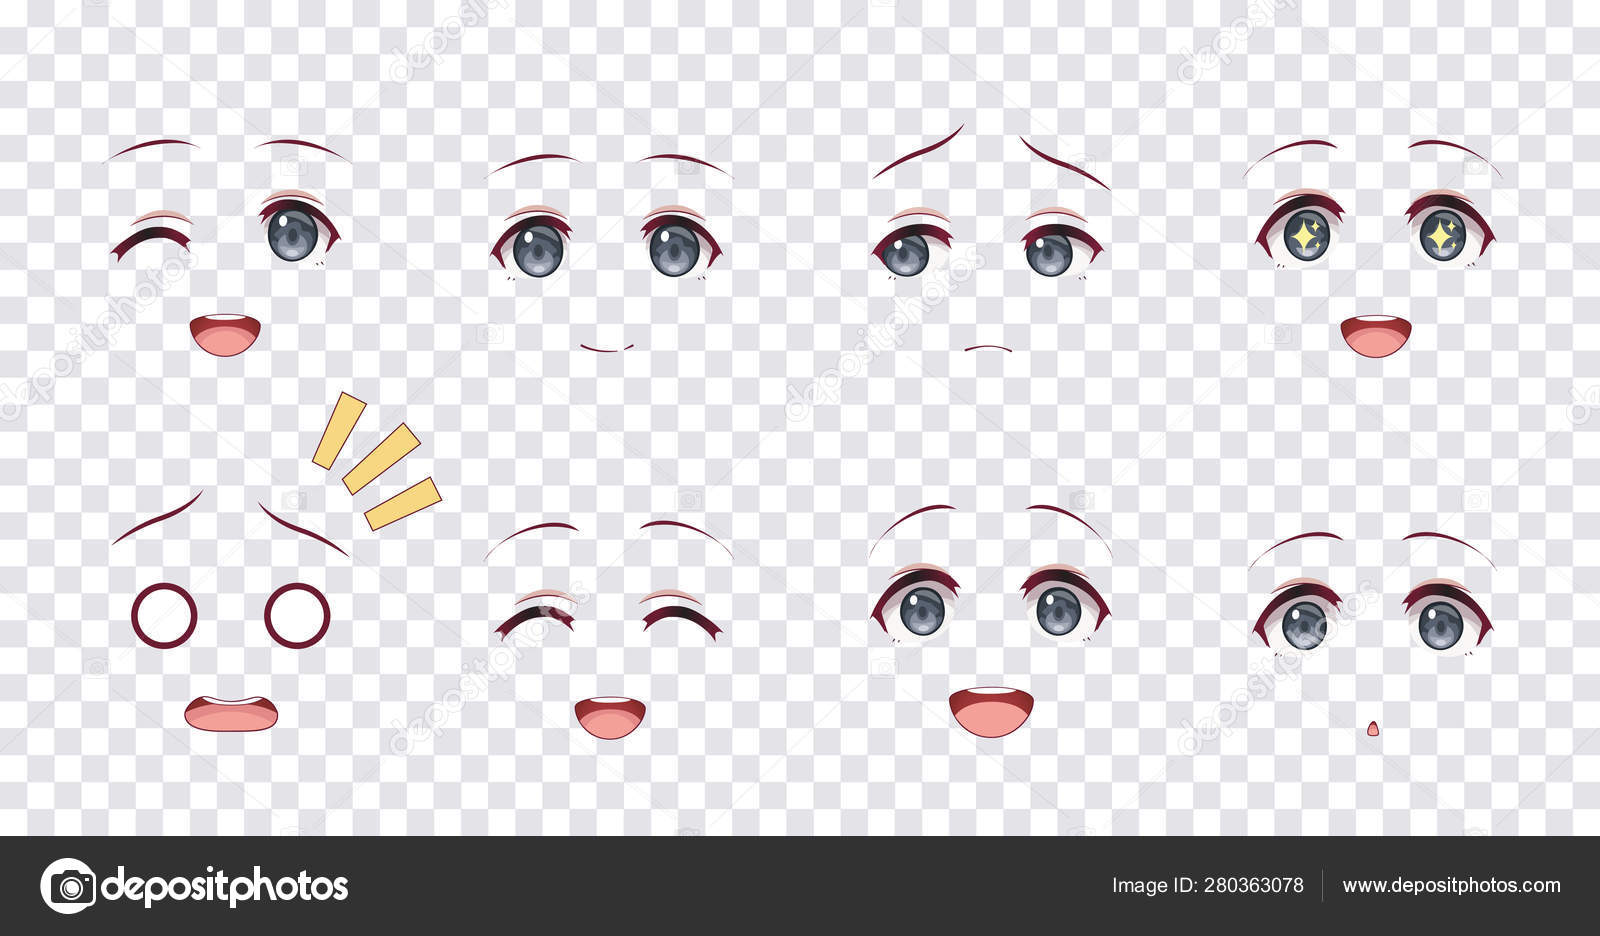 68,412 Anime Face Images, Stock Photos, 3D objects, & Vectors | Shutterstock